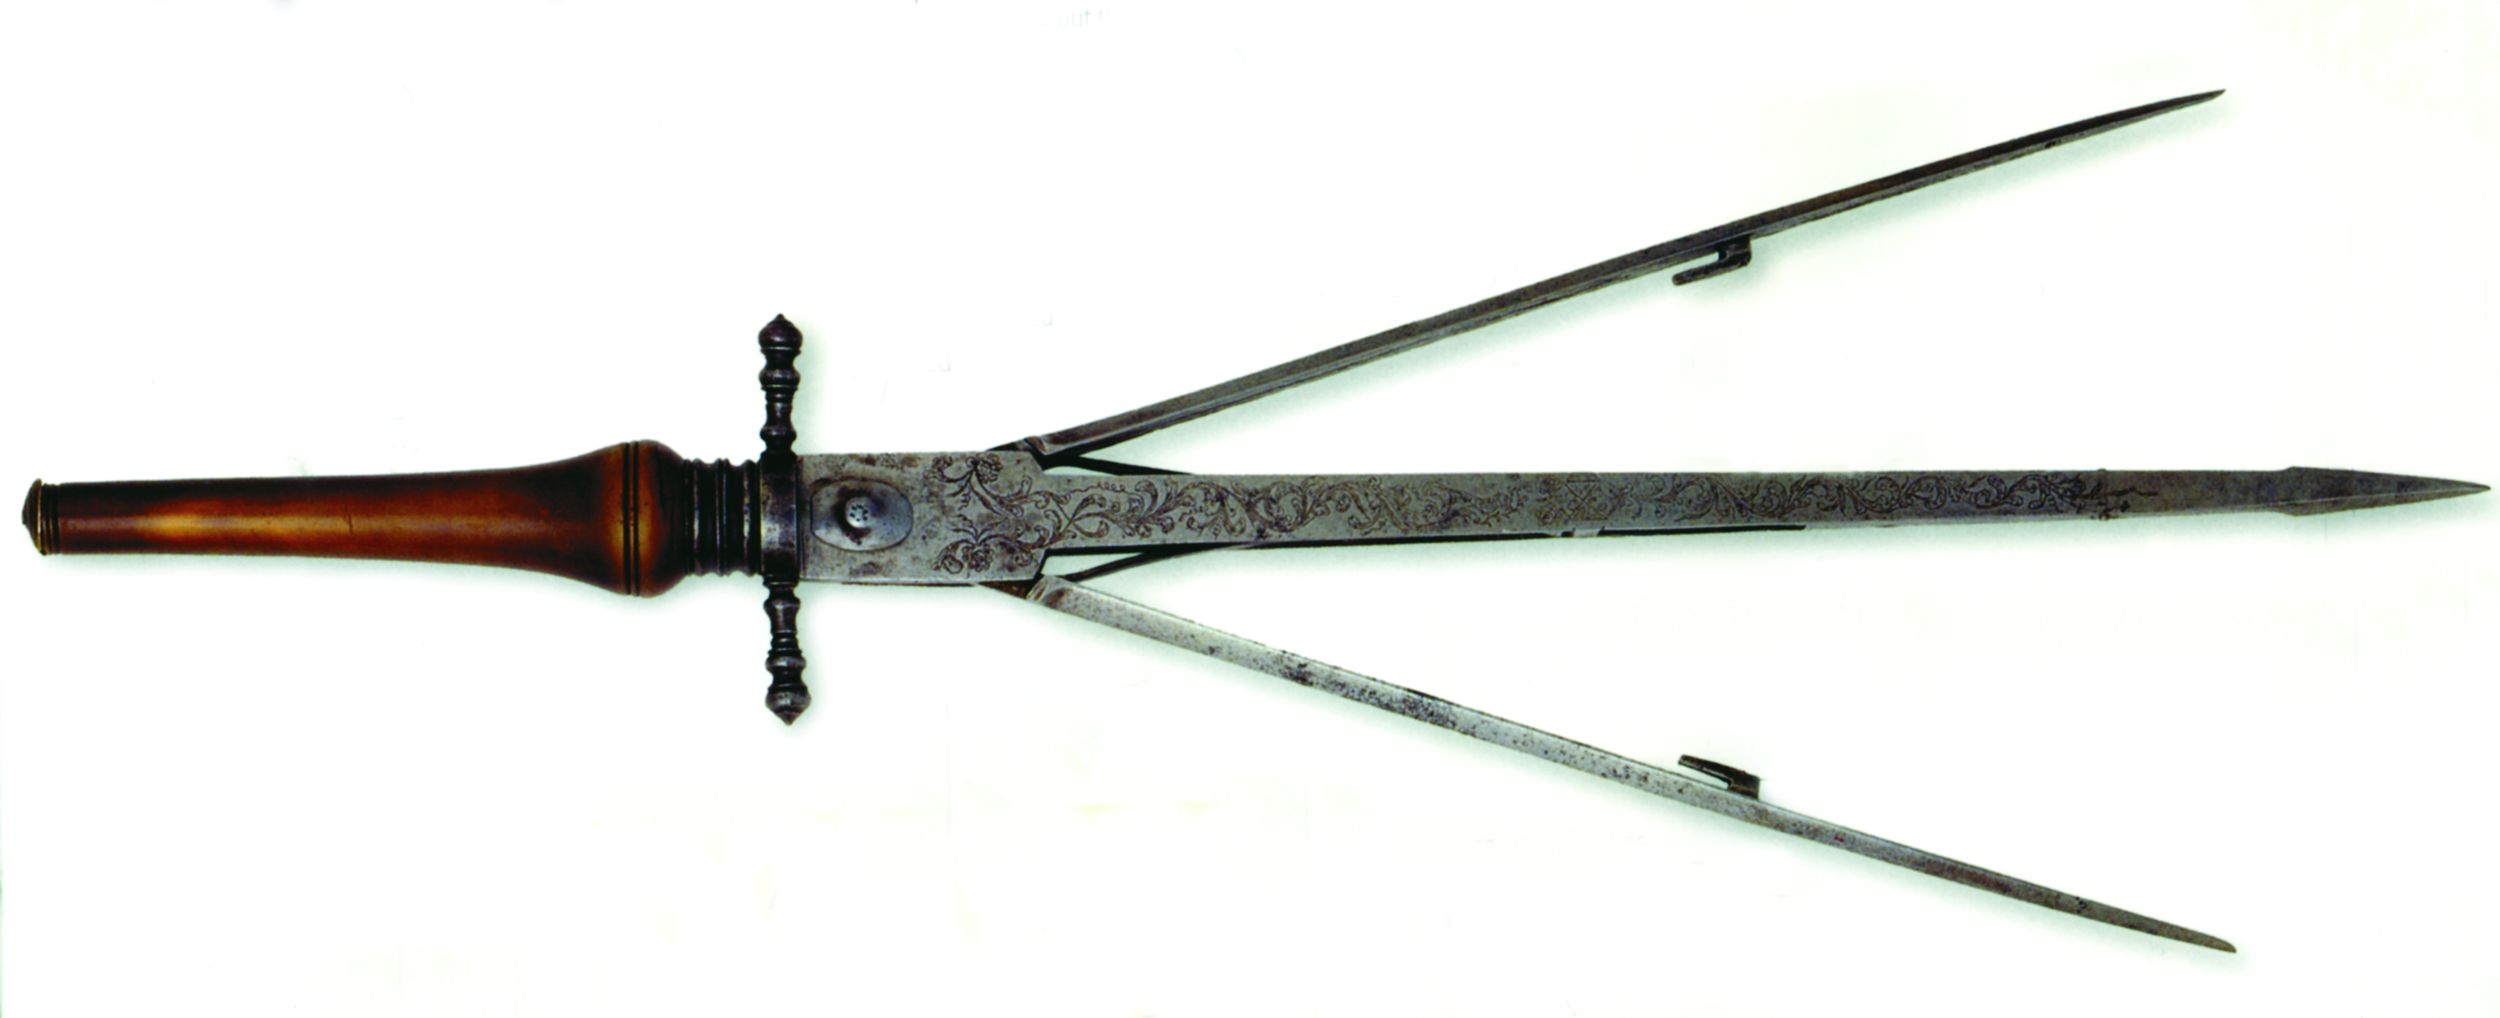 The 16th-century sinistra was was designed to catch an opponent’s sword blade and wrench it away. It was released with a slide button then expanded into a V-shape. 